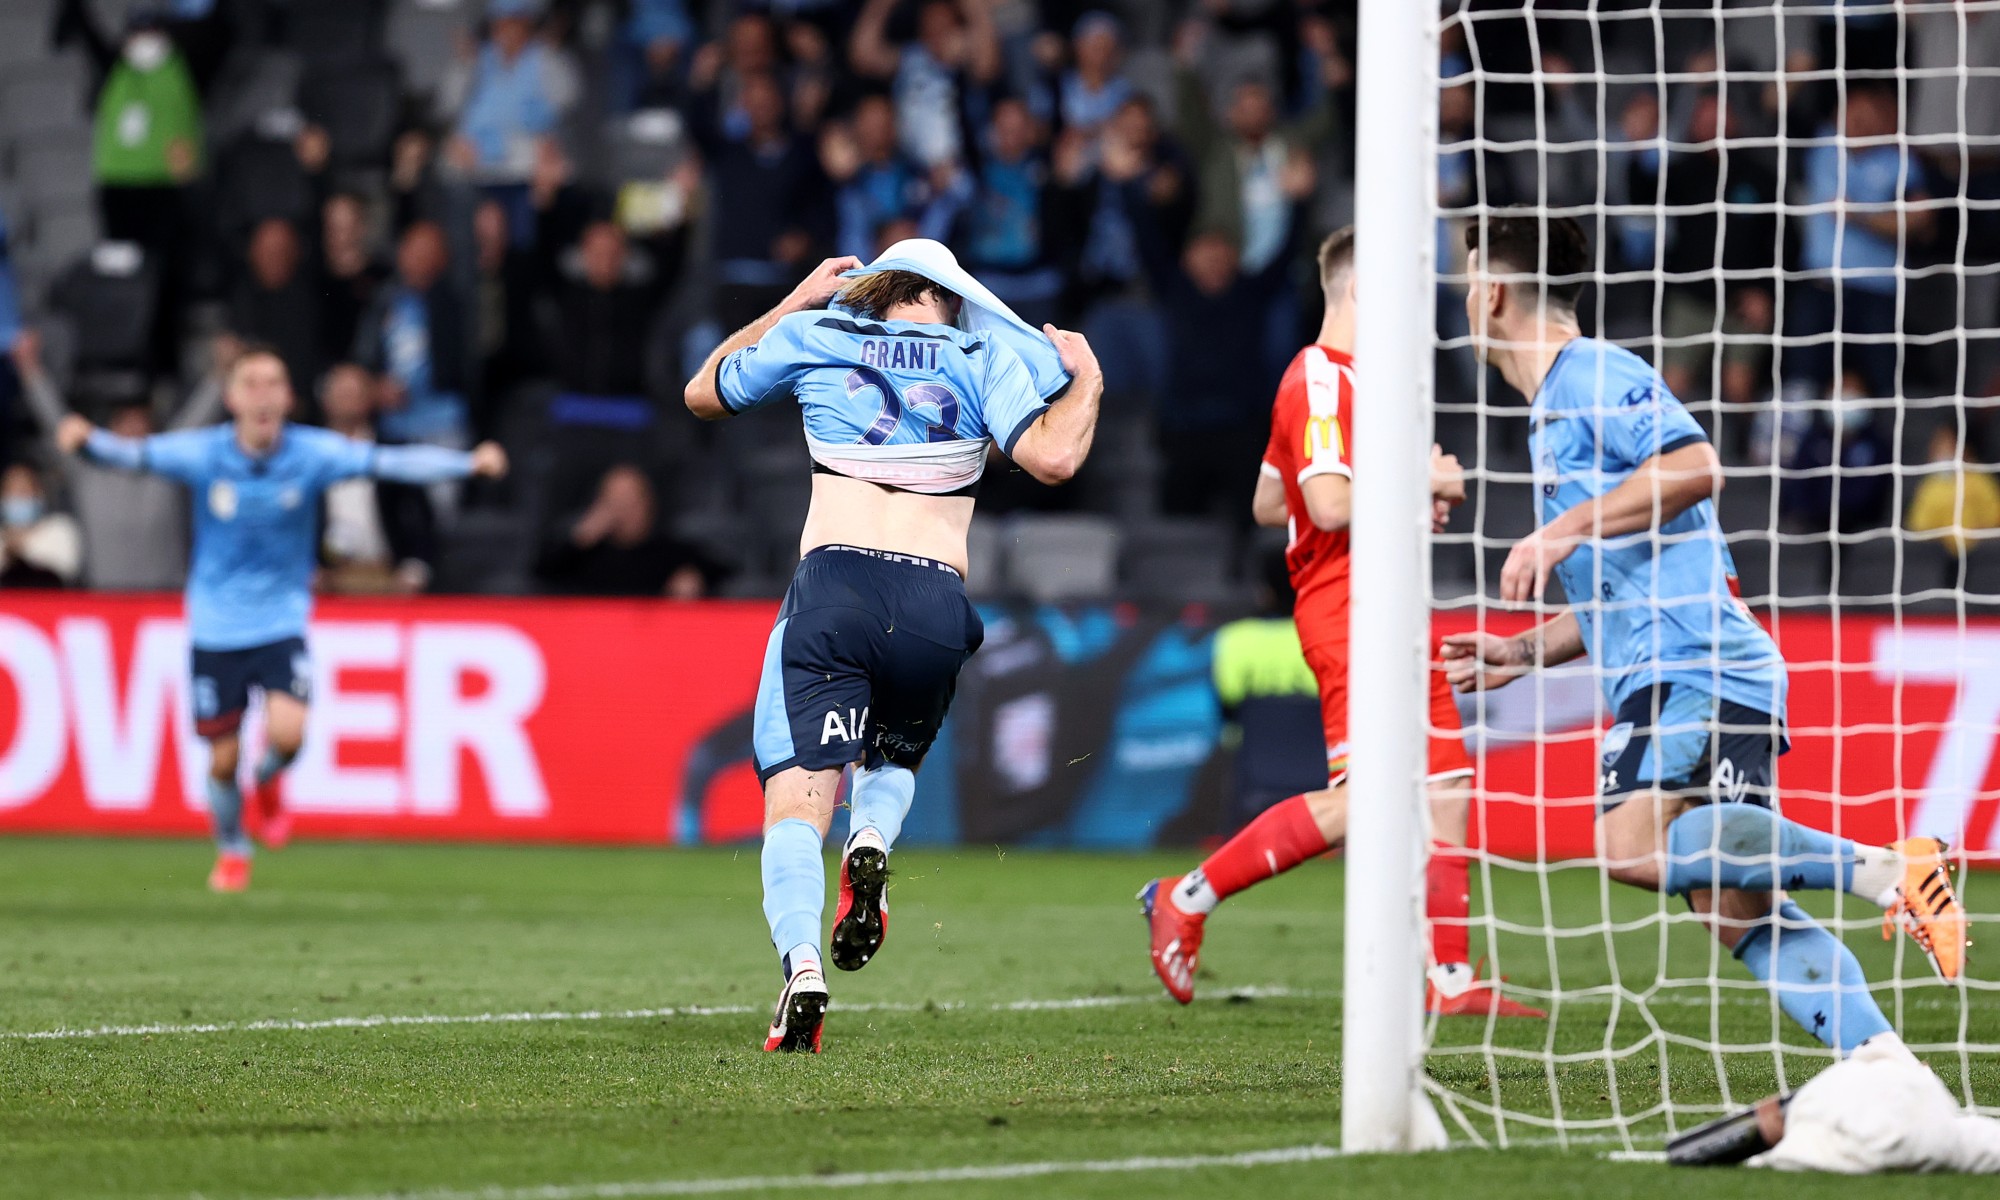 Grant reacts to scoring the goal that earned Sydney FC their third Championship in four years.